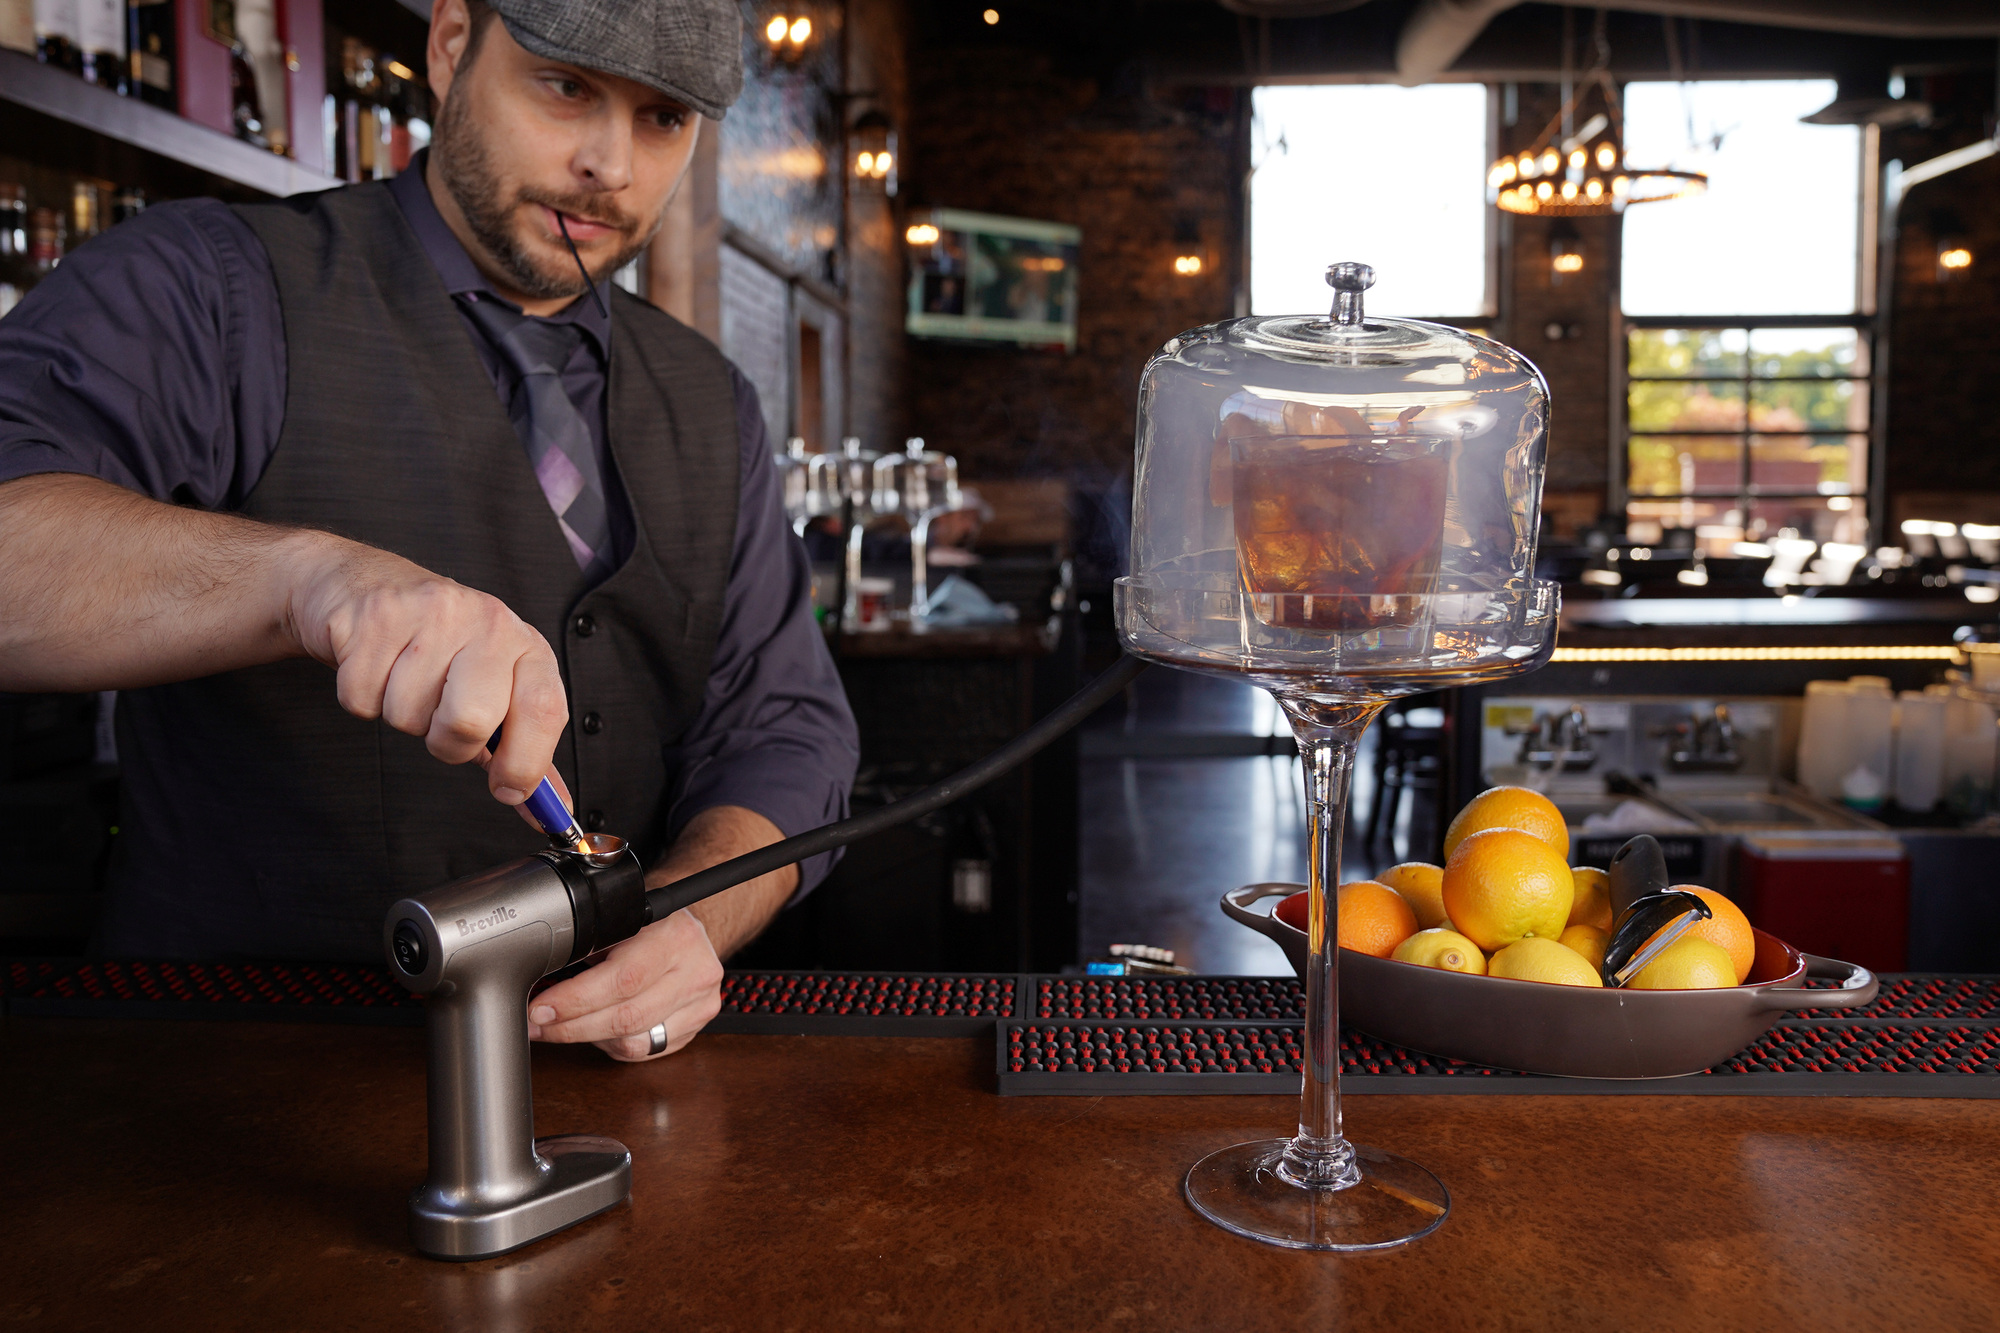 Brick & Bourbon owner Gary Sivyer used a smoking gun to make a Maple Old Fashioned cocktail.